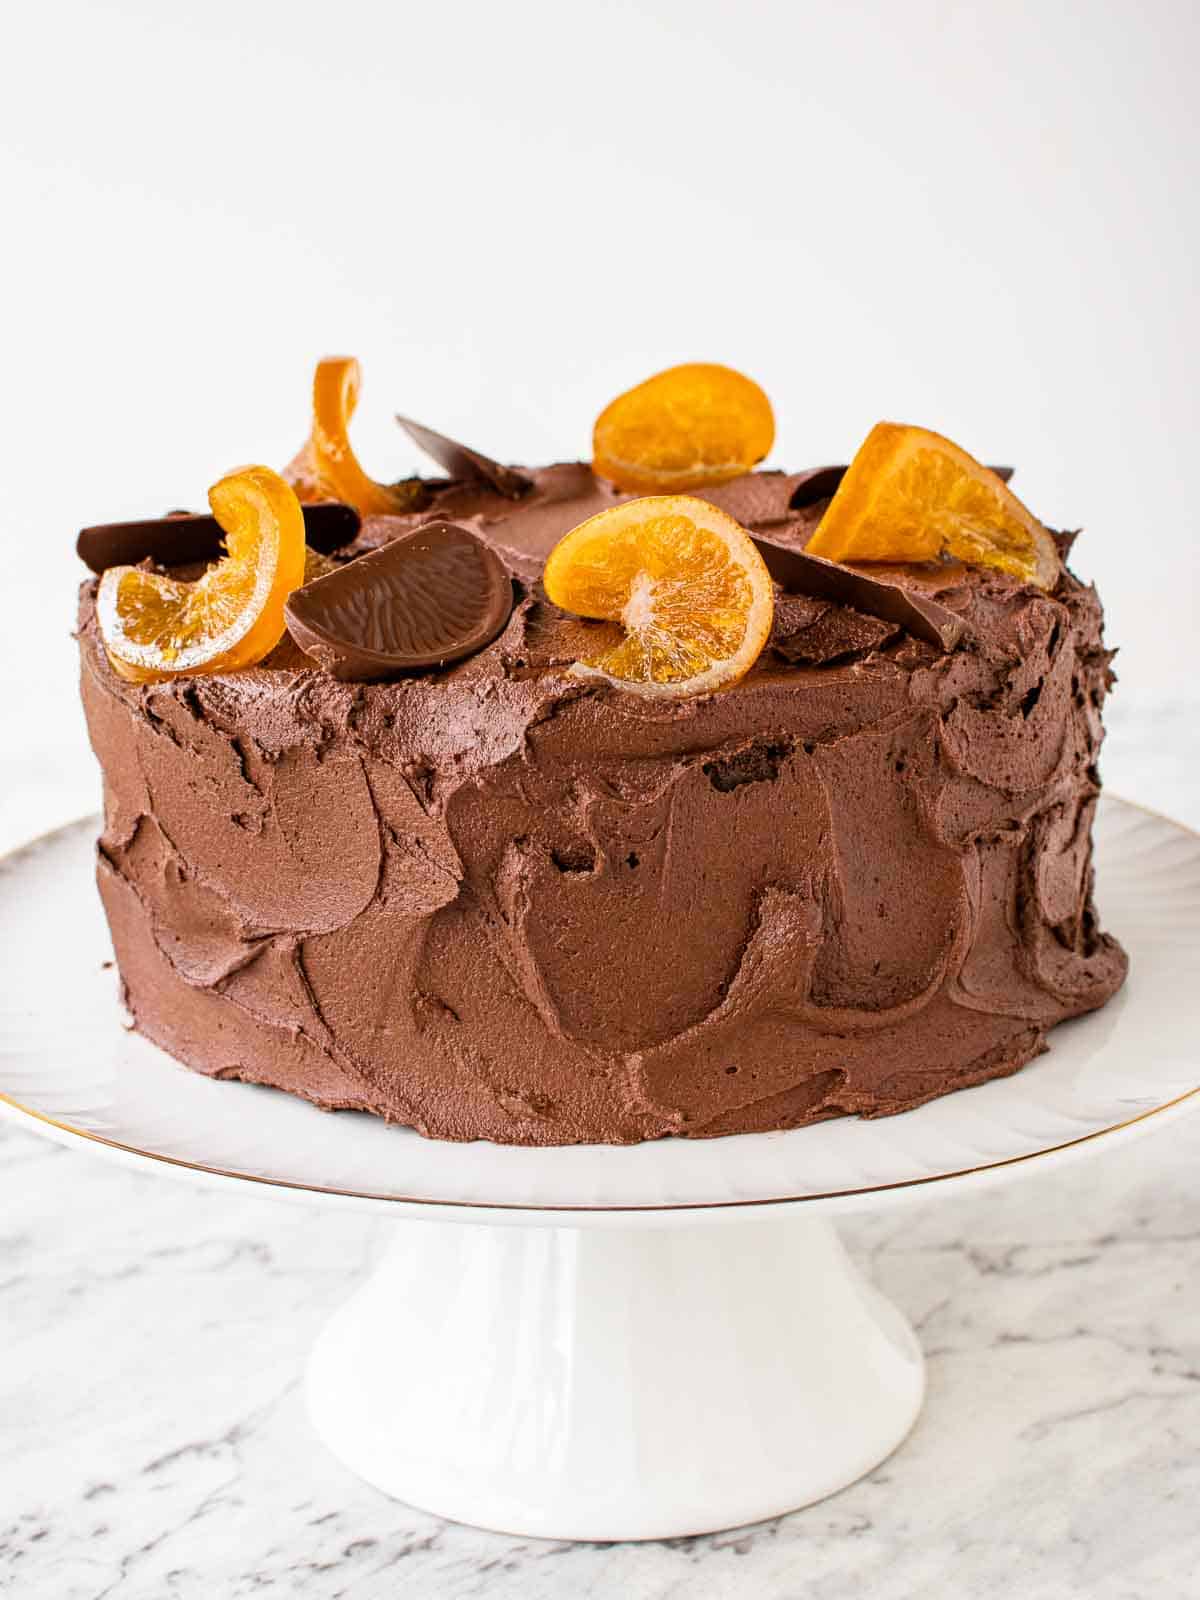 Chocolate orange cake on white cake stand with orange slices decoratively placed on top.